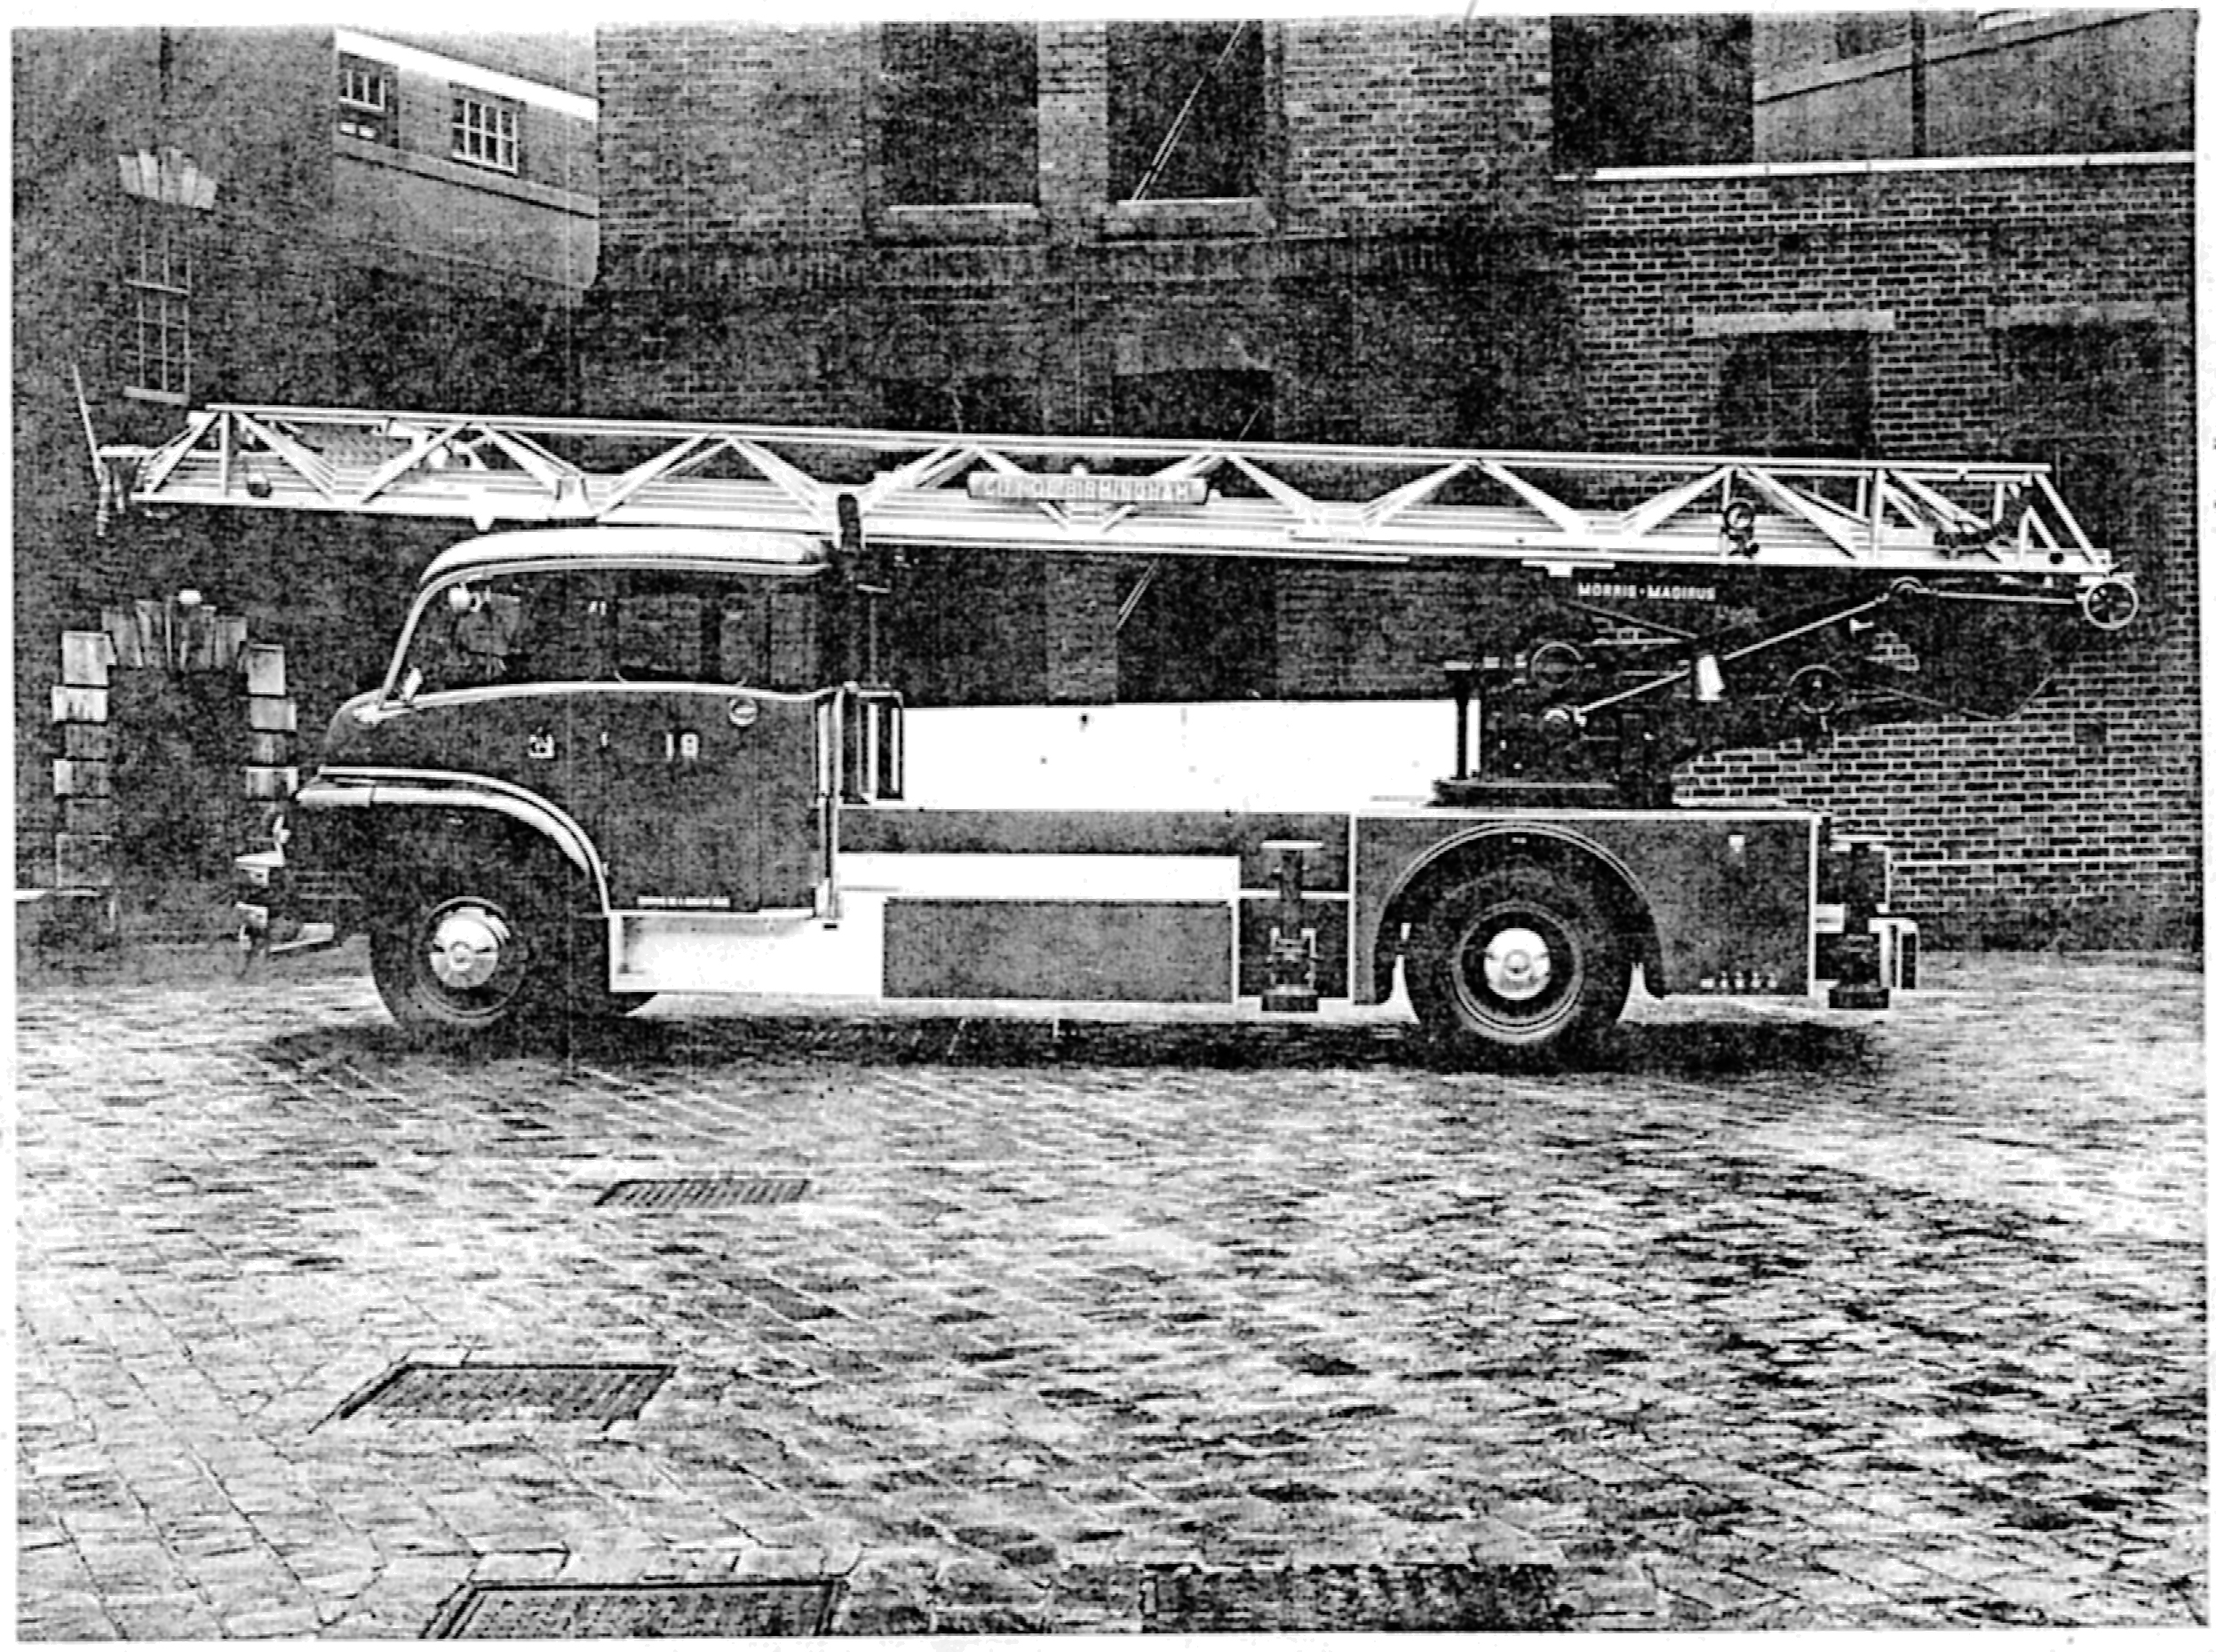 Bedford S-type fire engine  - Image 5